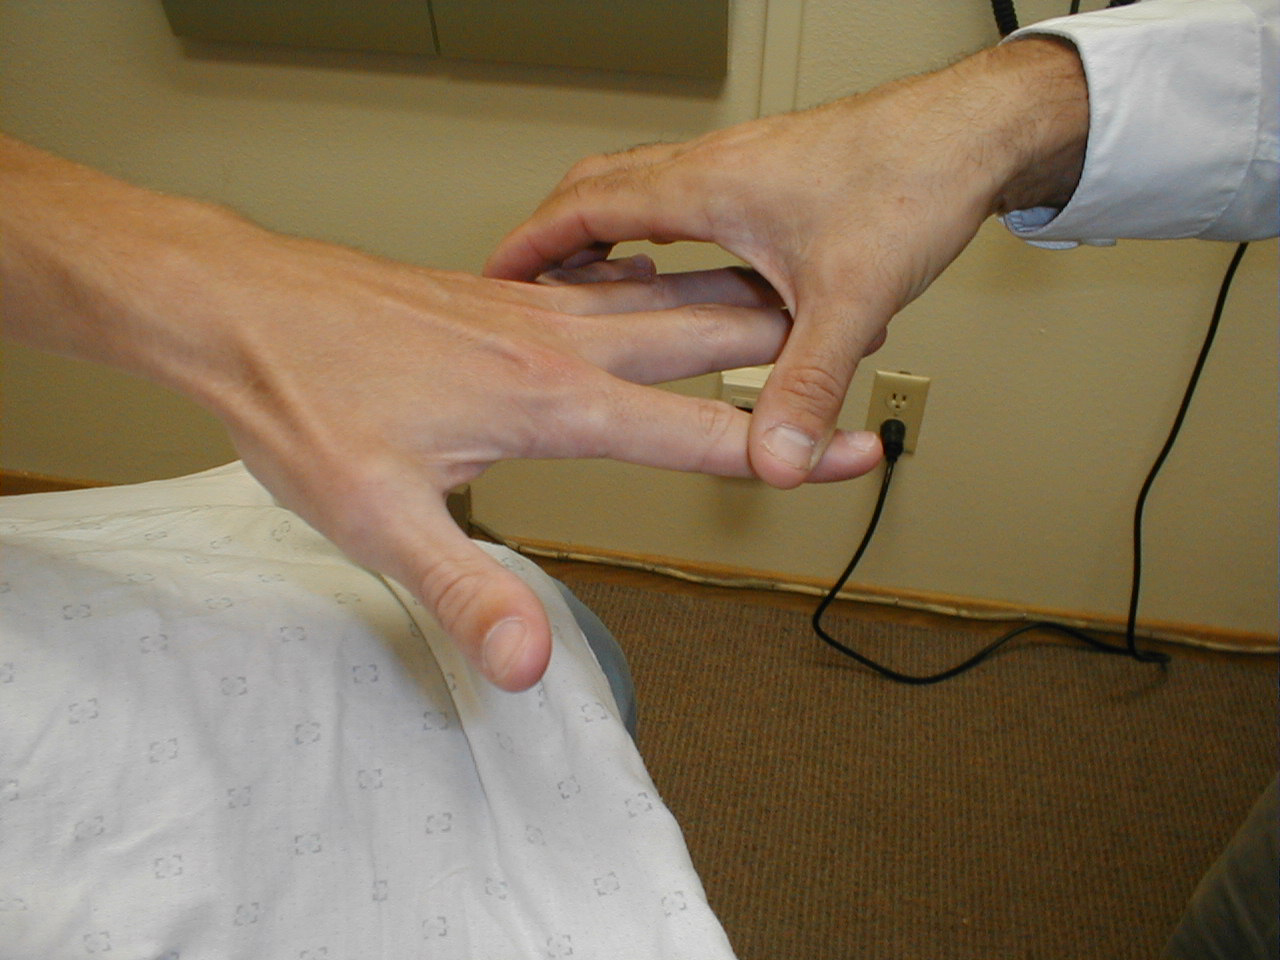 Intrinsic muscles of the hand (abduction) (Image courtesy of Charlie Goldberg, M.D., UCSD School of Medicine and VA Medical Center, San Diego, California)